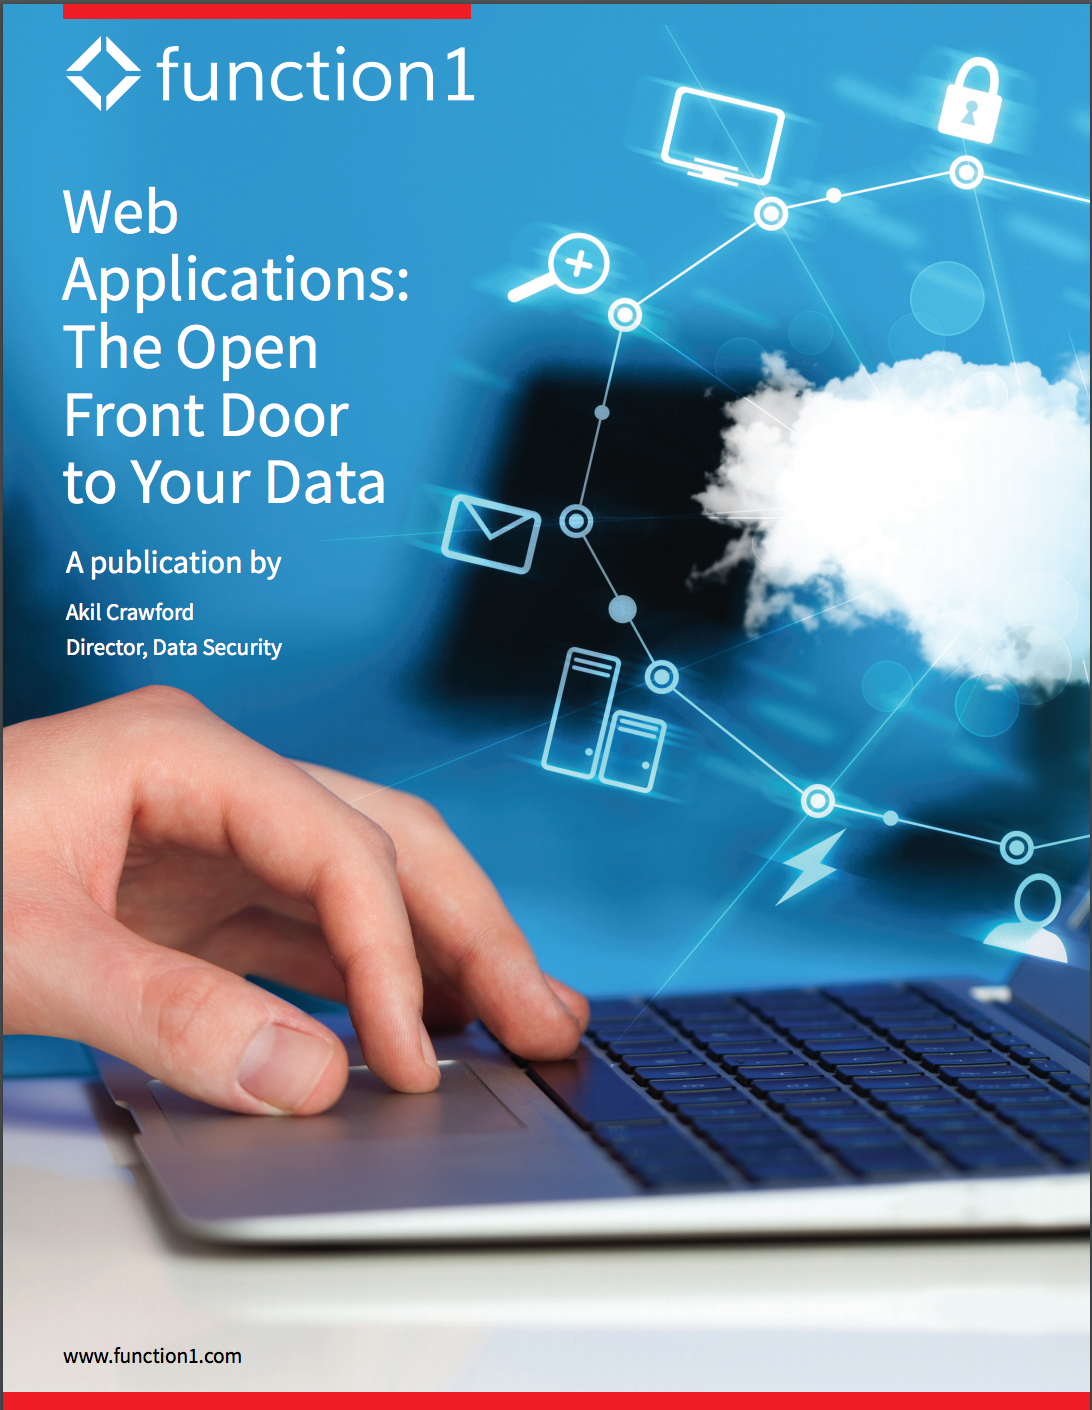 Web Applications - The Open Front Door to Your Data